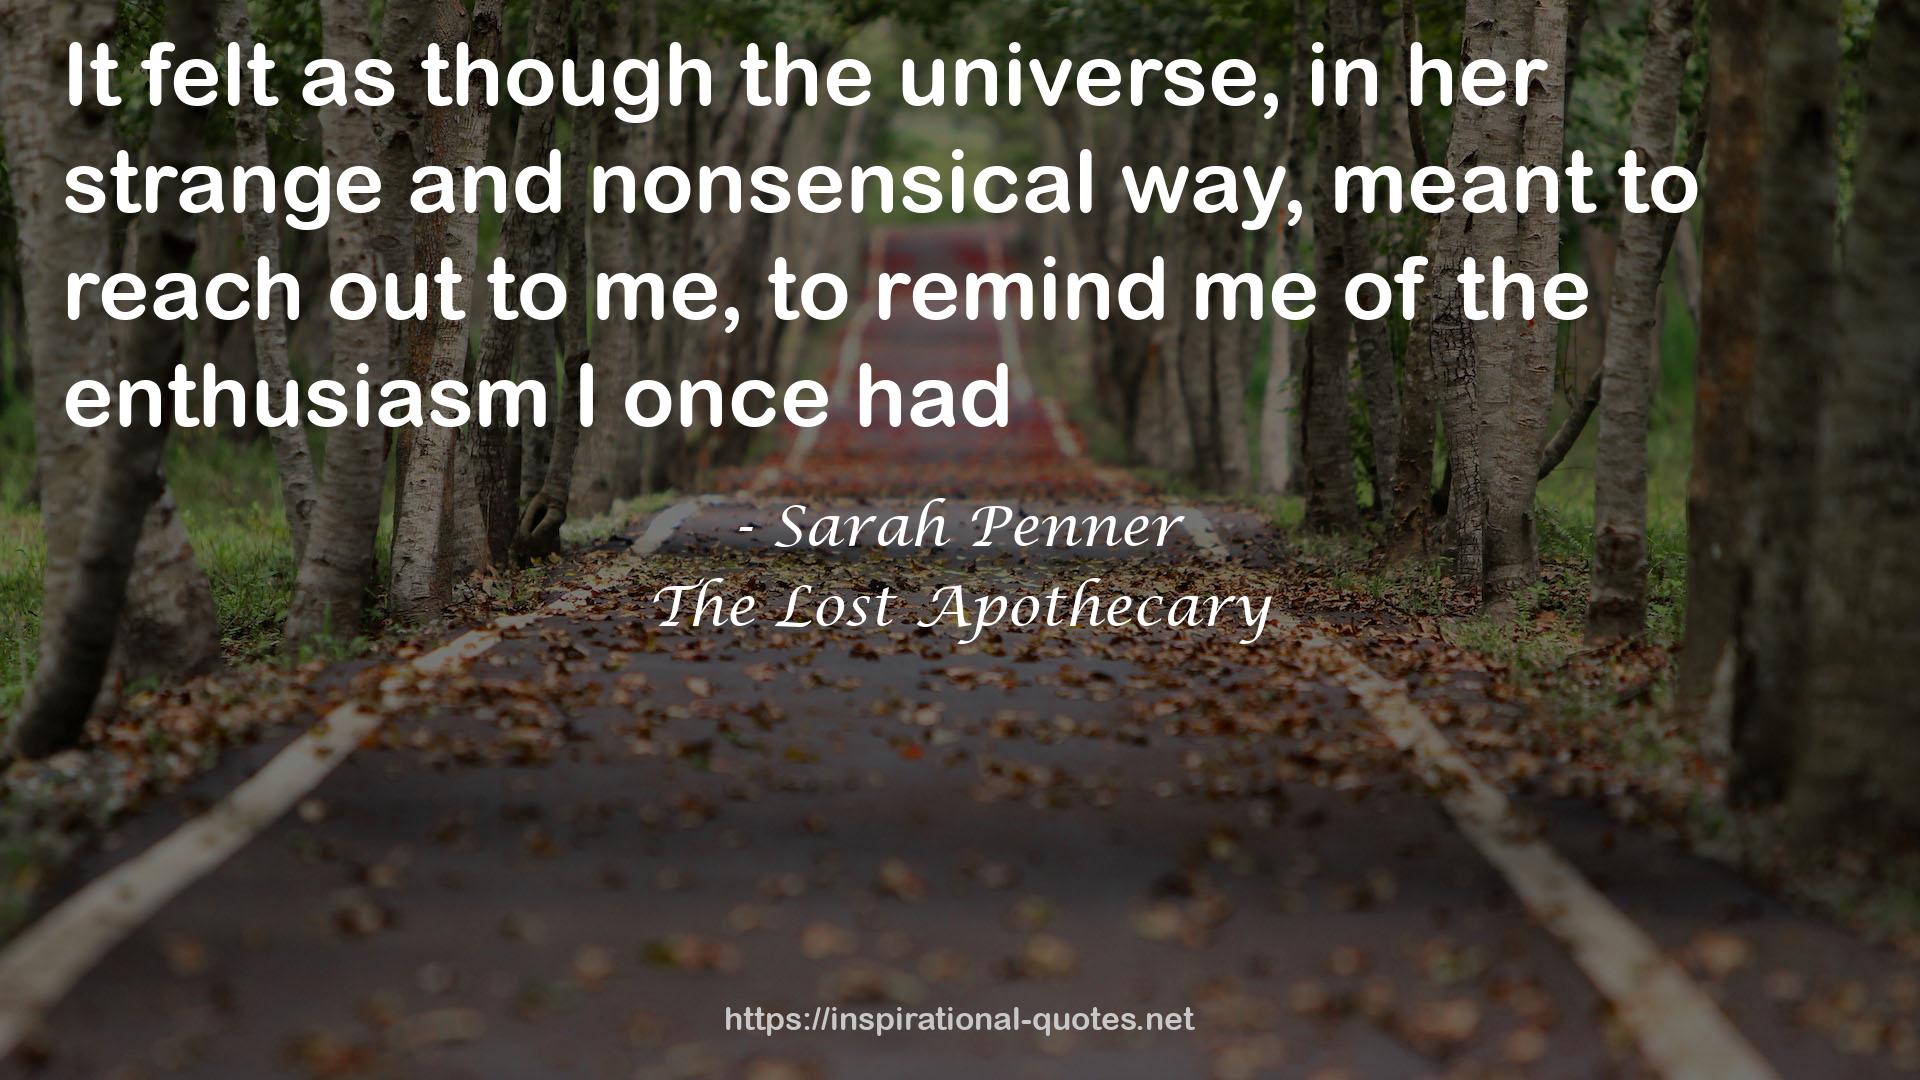 Sarah Penner QUOTES